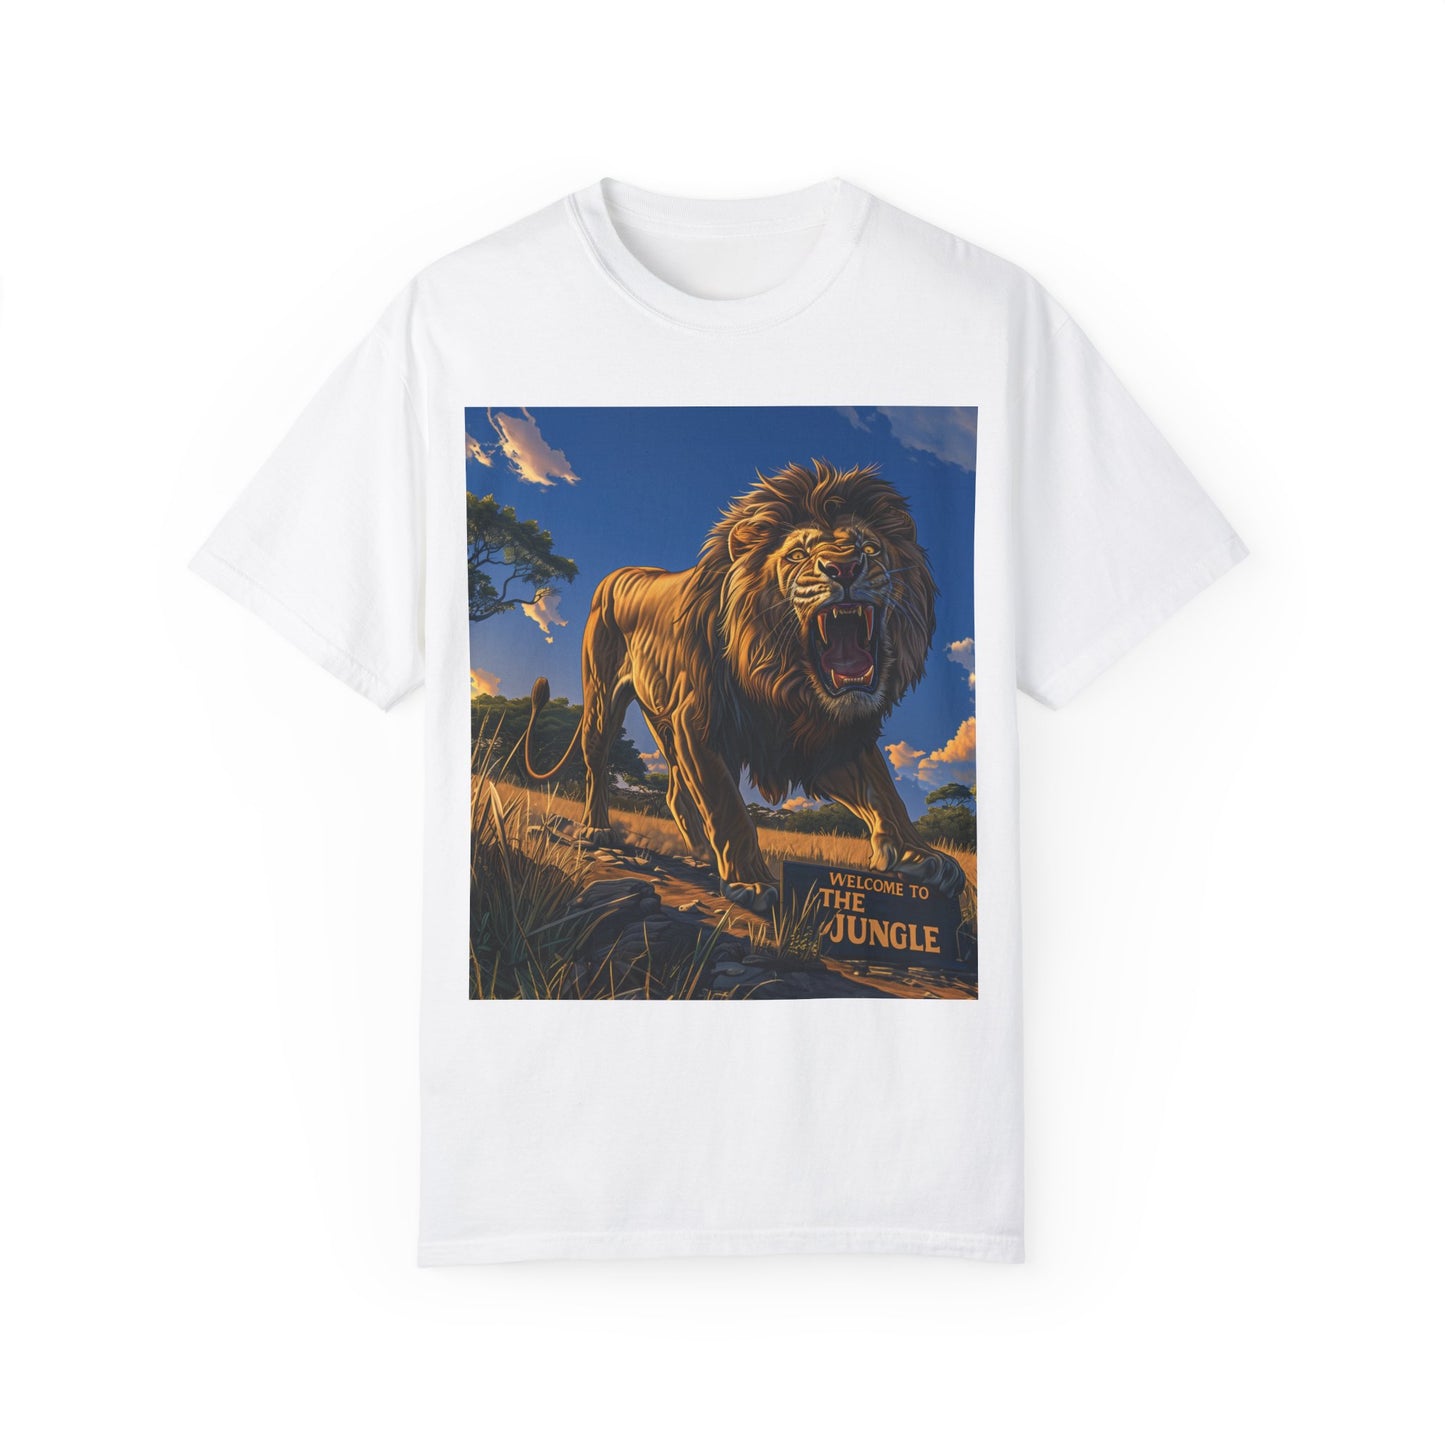 WELCOME TO THE JUNGLE - Garment-Dyed T-shirt